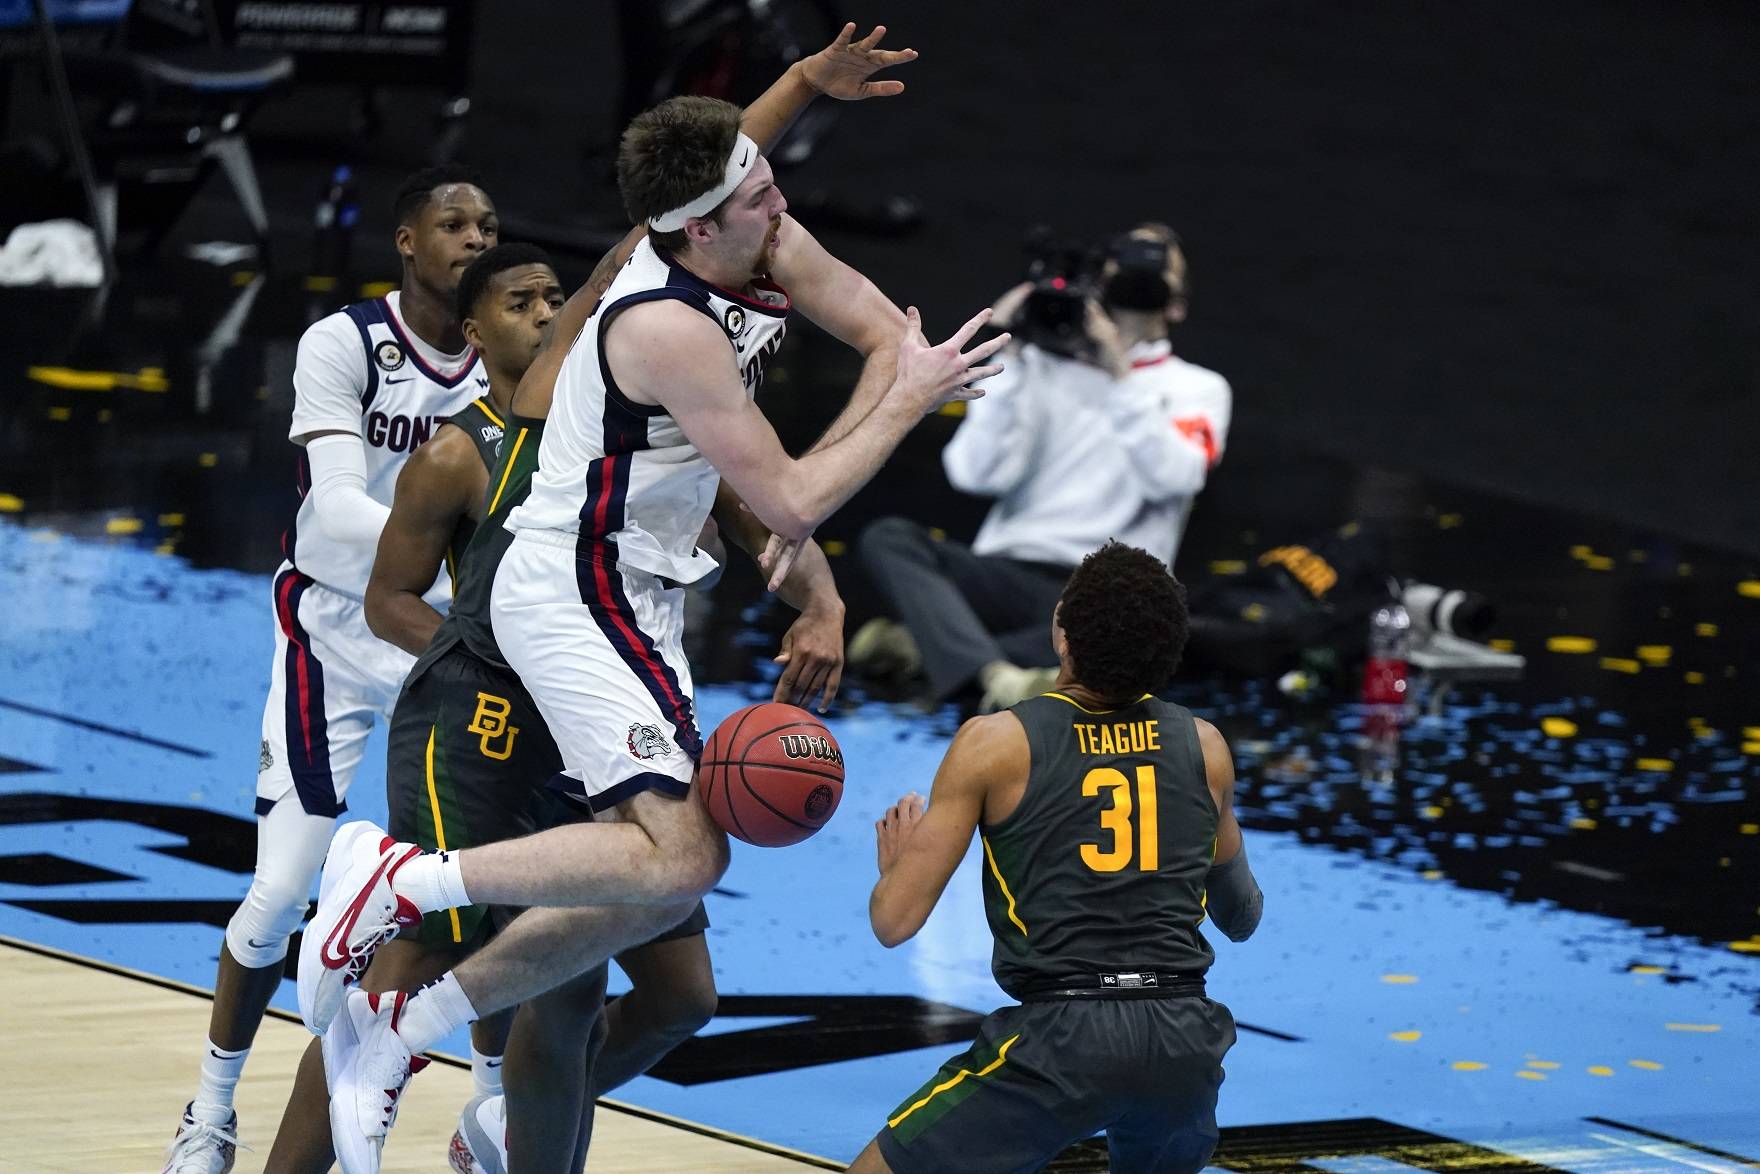 Gonzaga forward Drew Timme loses control of the ball in front of Baylor guard MaCio Teague (31) during the first half of the championship game in the men’s Final Four NCAA college basketball tournament, Monday, April 5, 2021, at Lucas Oil Stadium in Indianapolis. (AP Photo/Michael Conroy)